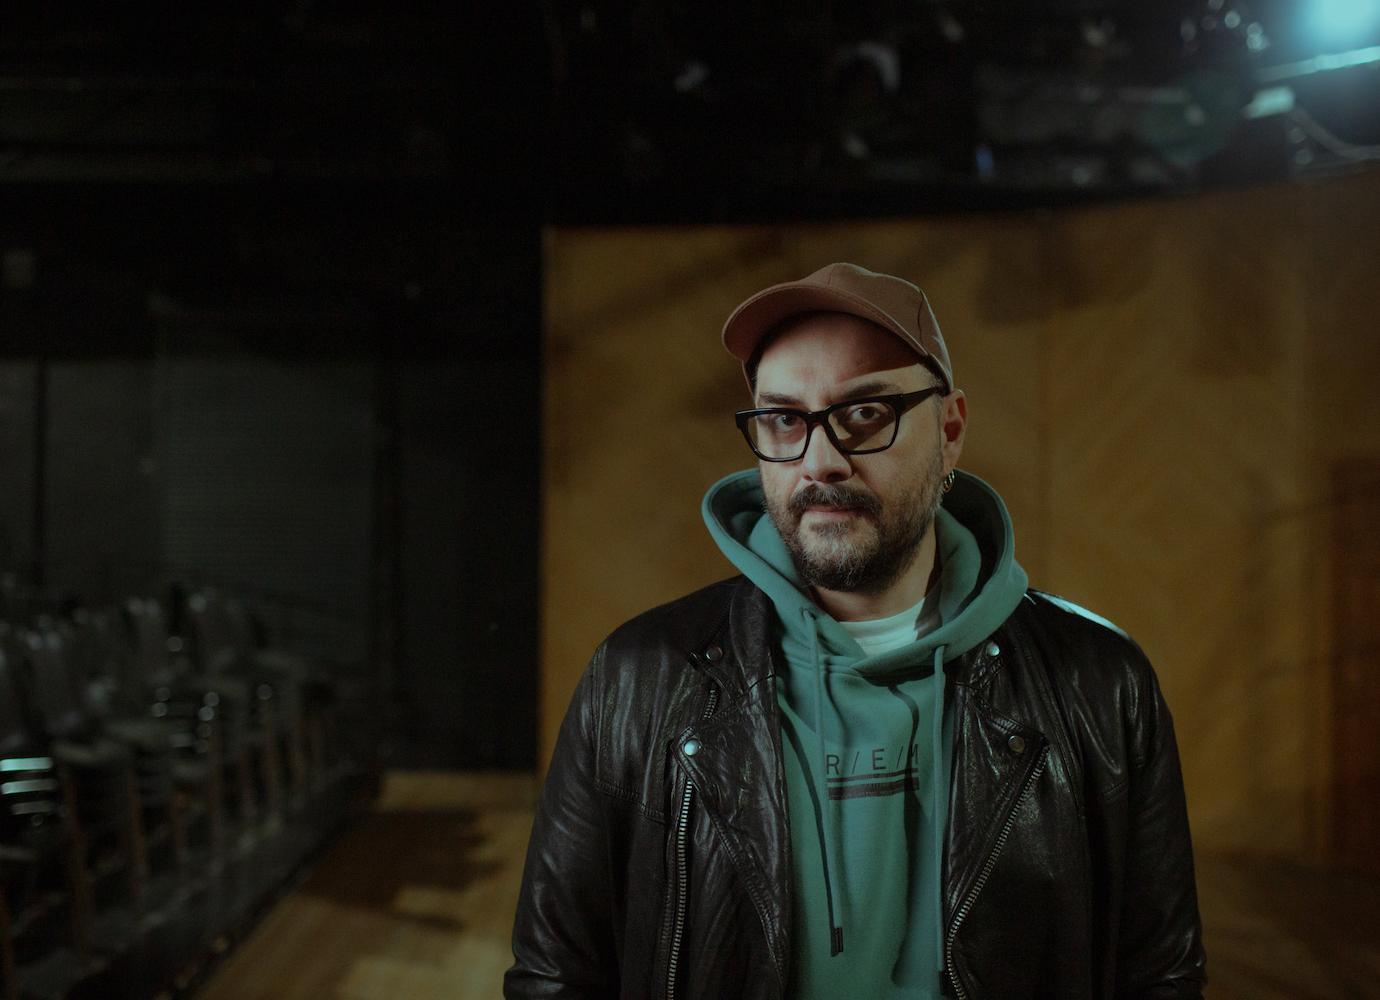 ‘Culture is worth suffering for’: the rise and fall of Kirill Serebrennikov